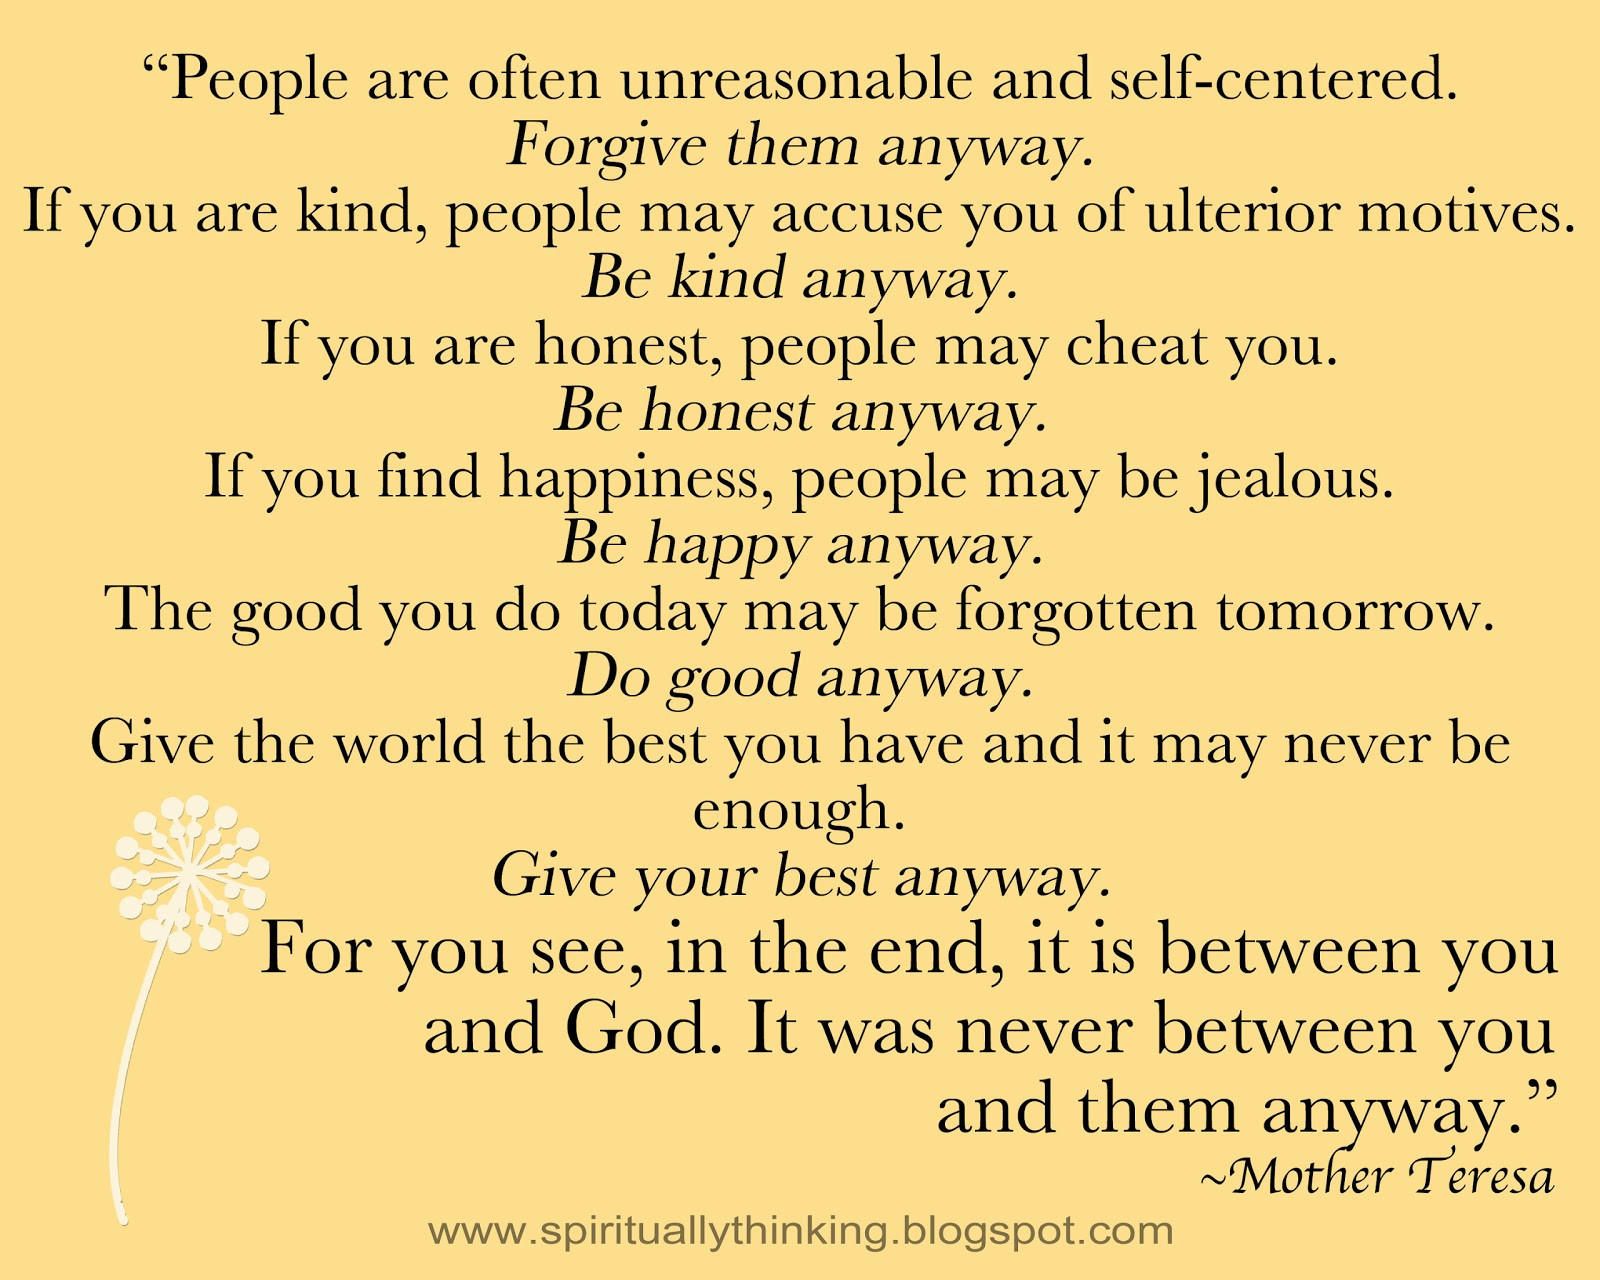 Mother Teresa Quote Be Kind Anyway
 and Spiritually Speaking Do it Anyway